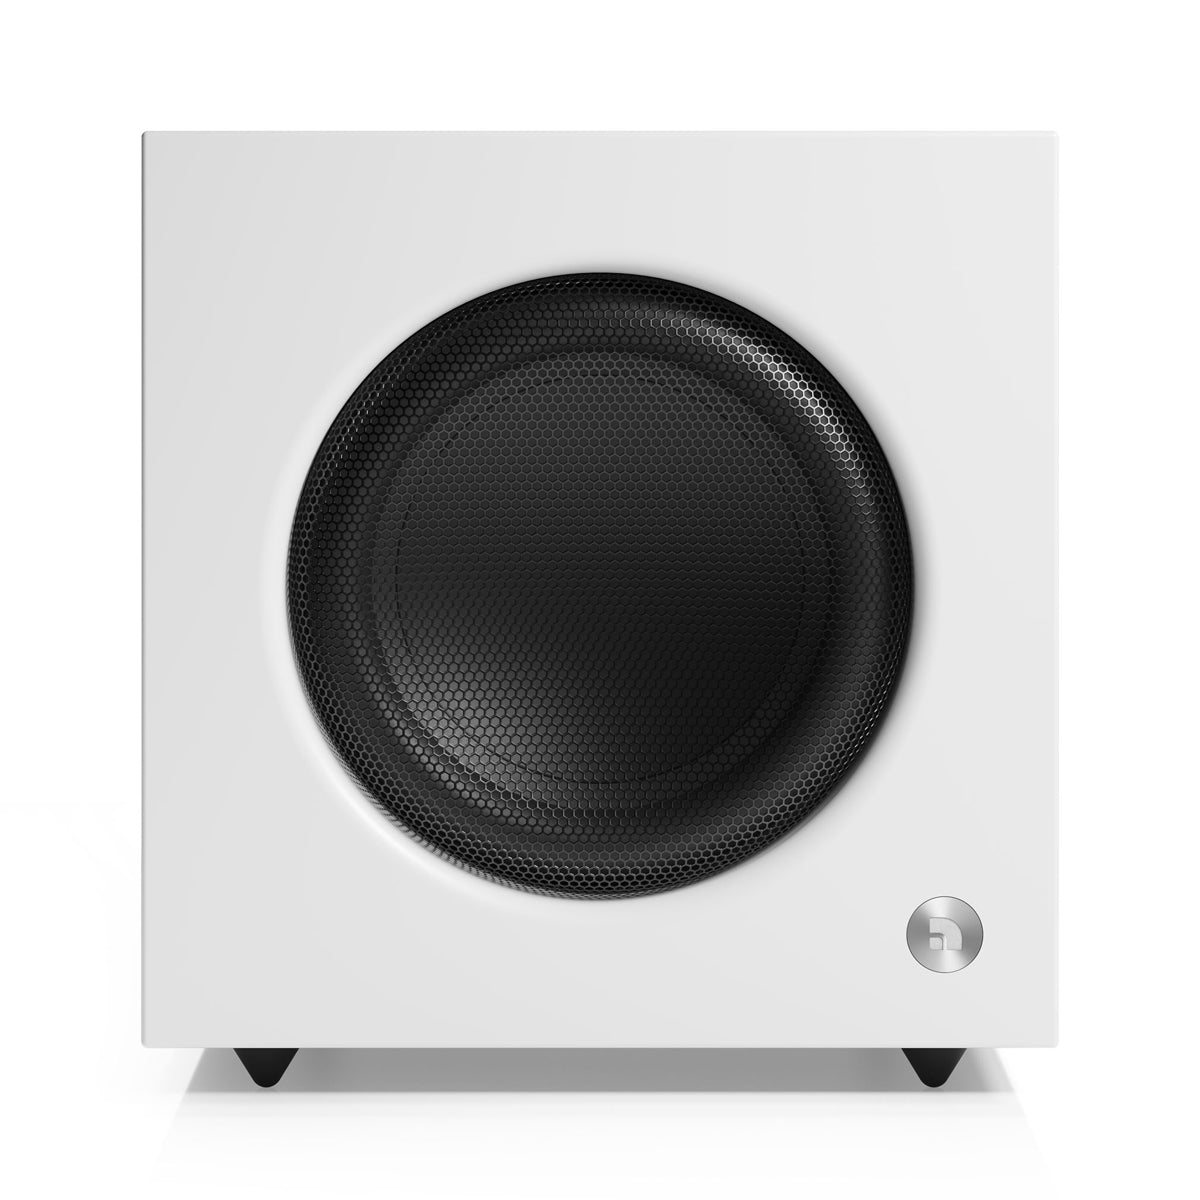 Audio Pro SW10 10" Power Subwoofer - White - The Audio Experts